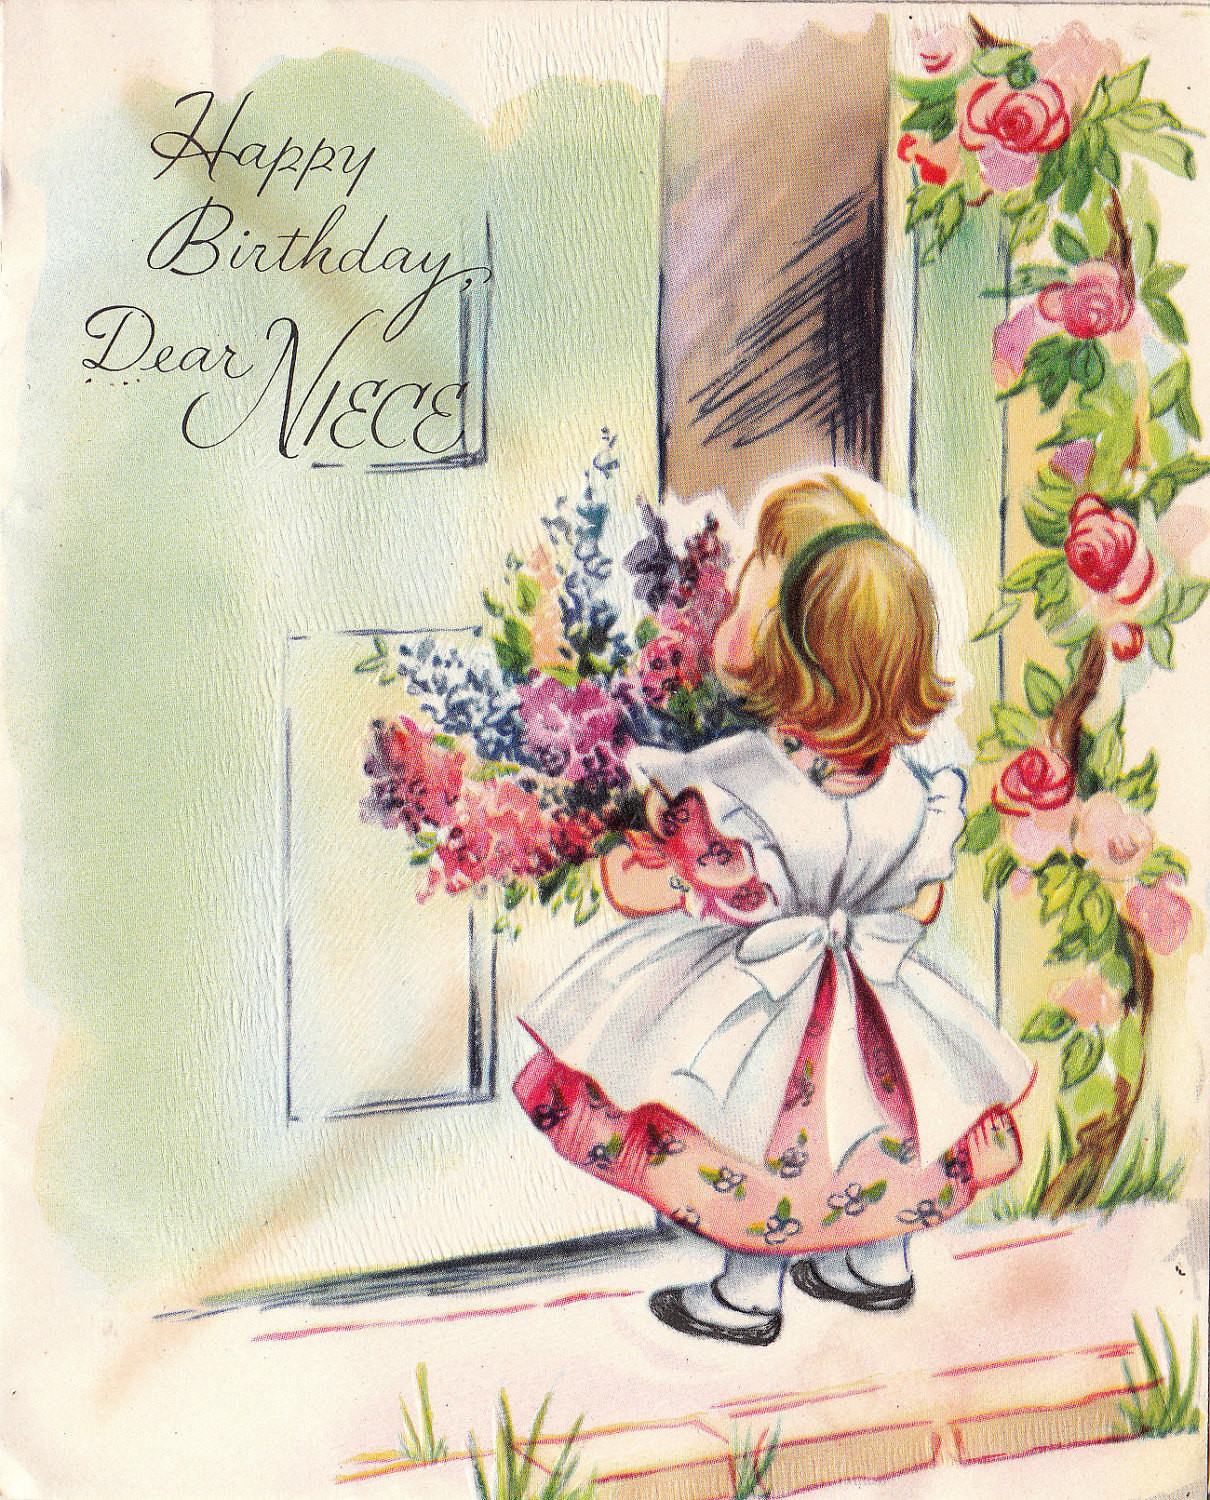 Best ideas about Vintage Birthday Card
. Save or Pin Vintage 1950s Happy Birthday Dear Niece Greetings Card B44 Now.